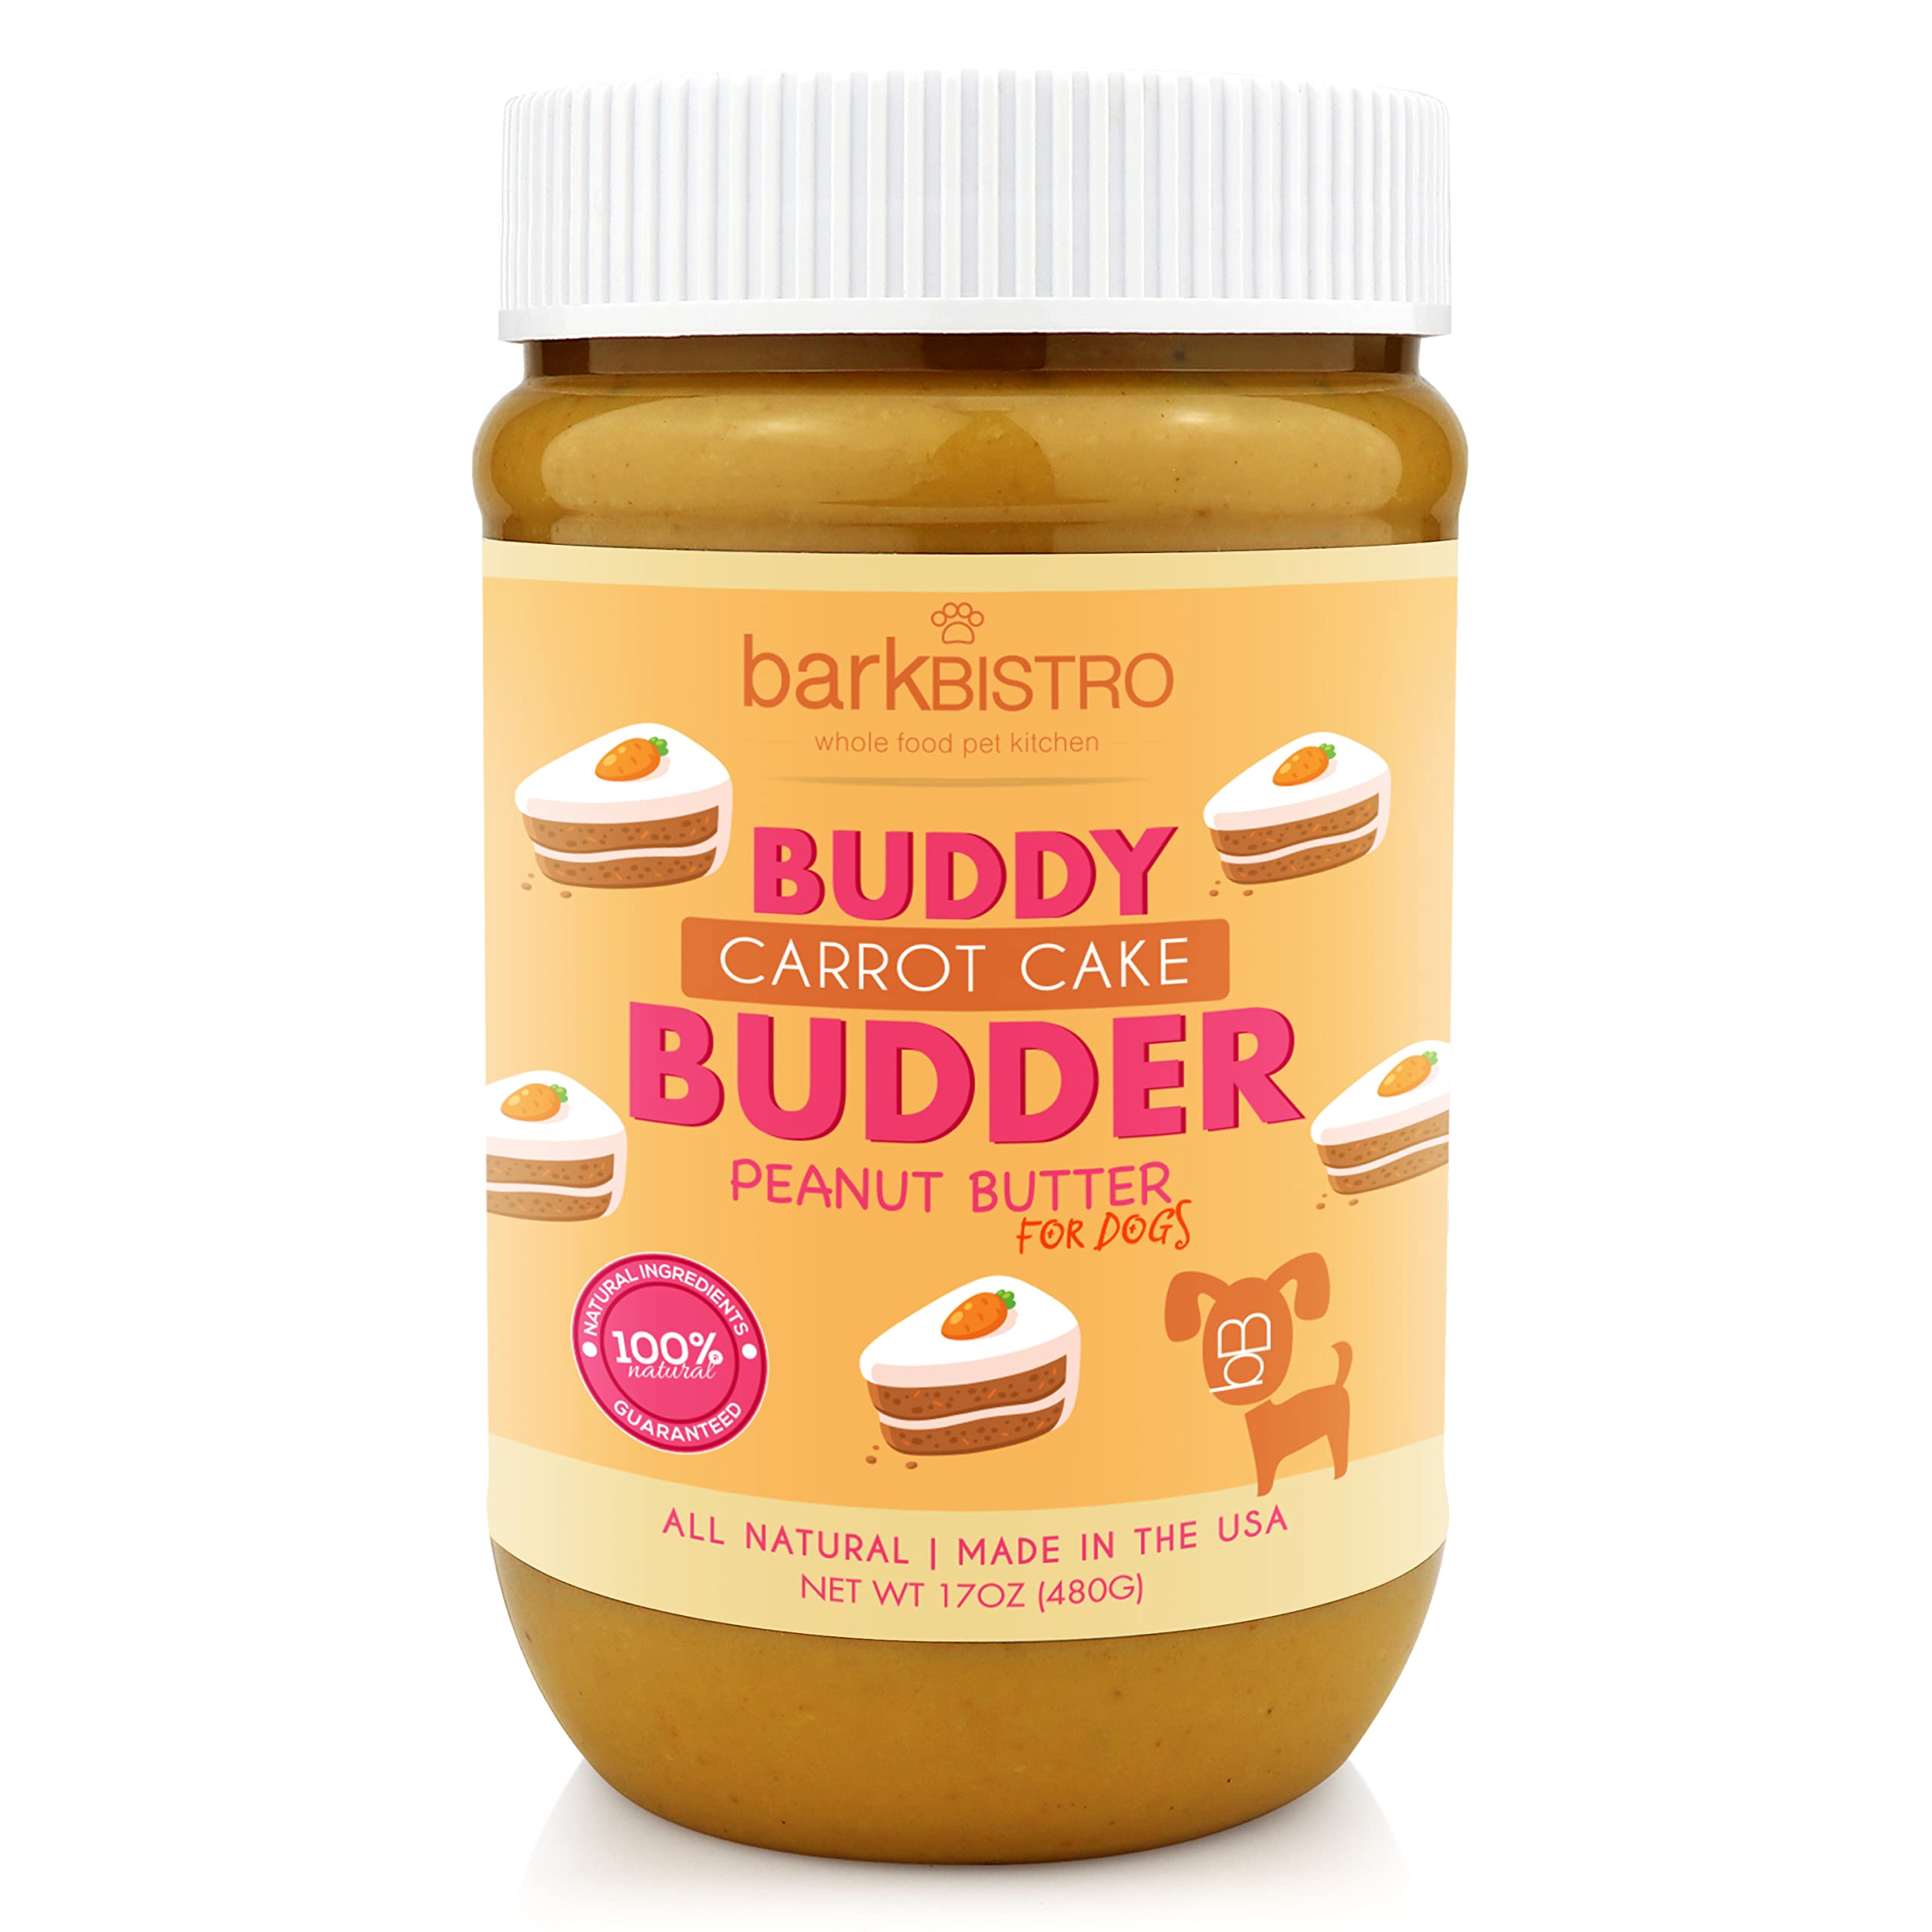 BUDDY BUDDER Carrot Cake, 100% Natural Healthy Peanut Butter Dog Treats, Stuff in Toy, Dog Pill Pocket, Made in USA, (17 oz Jars